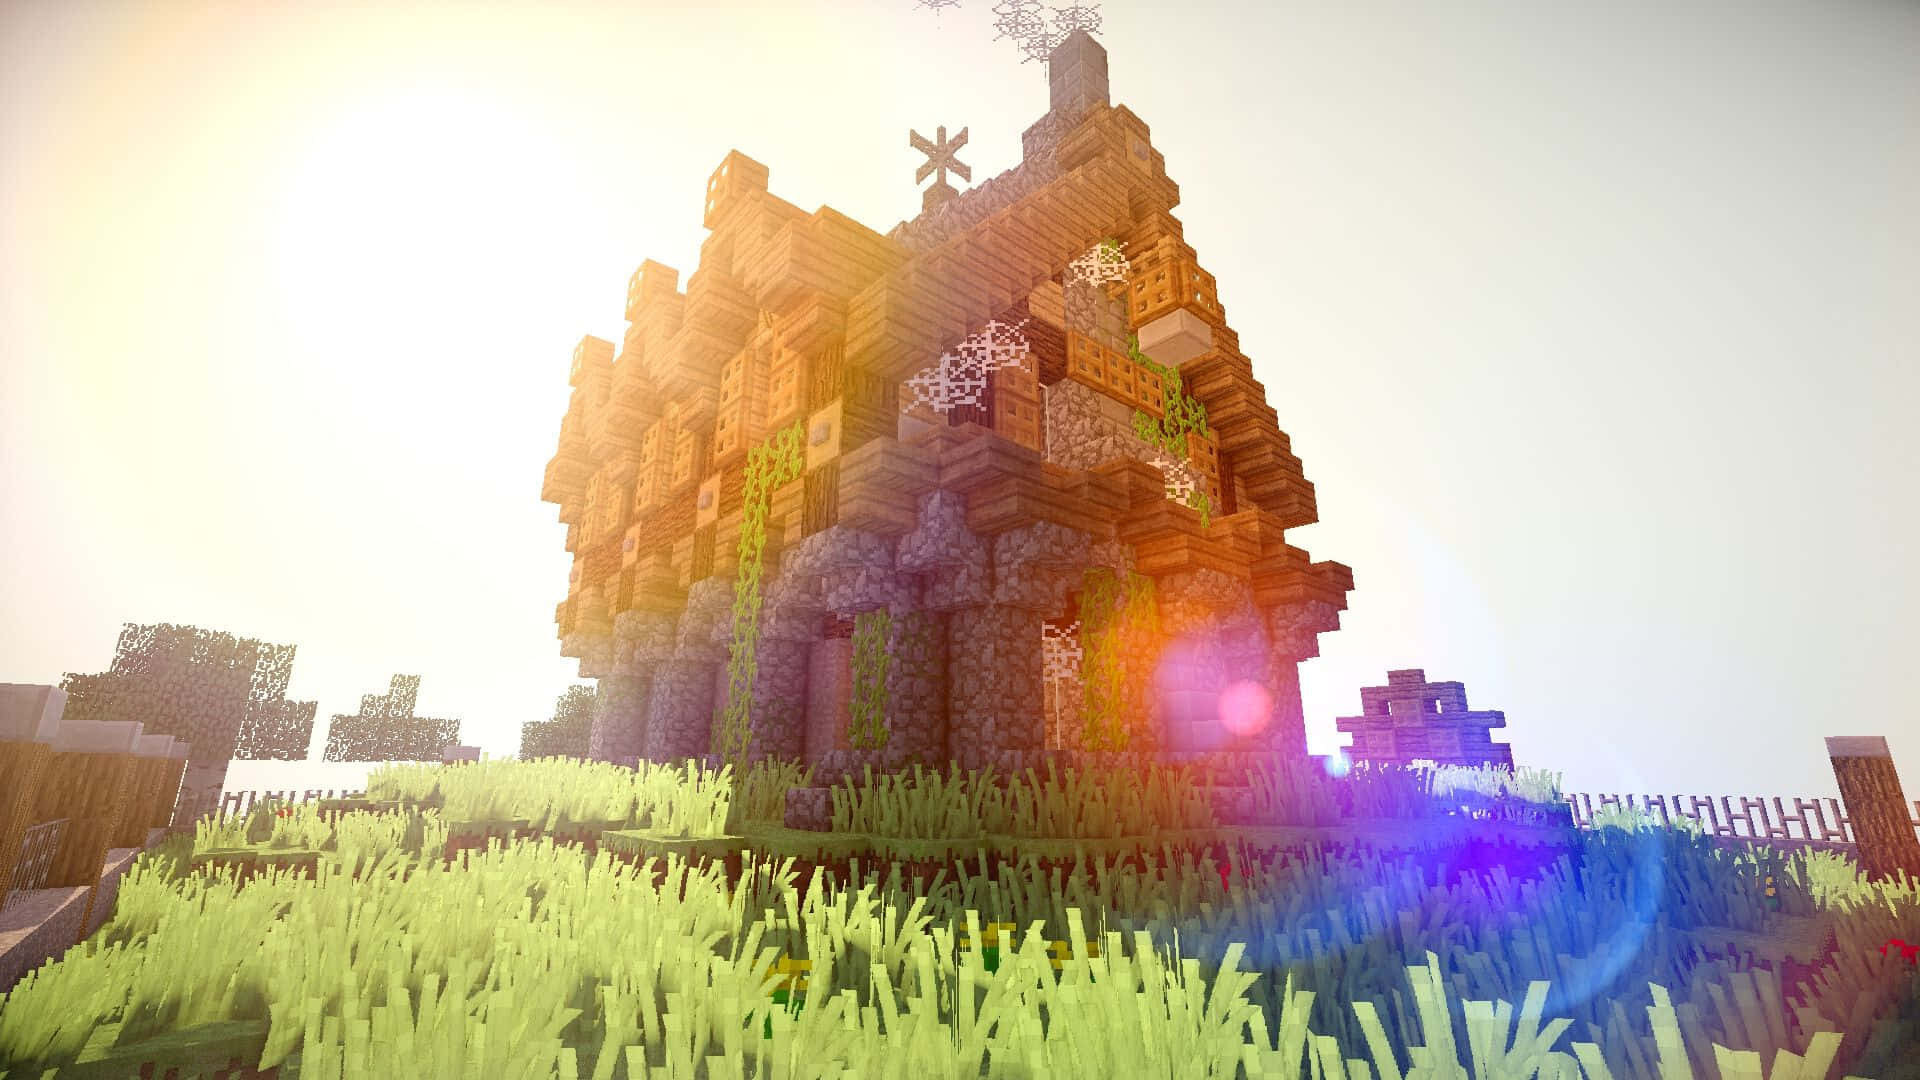 "Bring a whole new level of realism to Minecraft with the help of Shaders!" Wallpaper